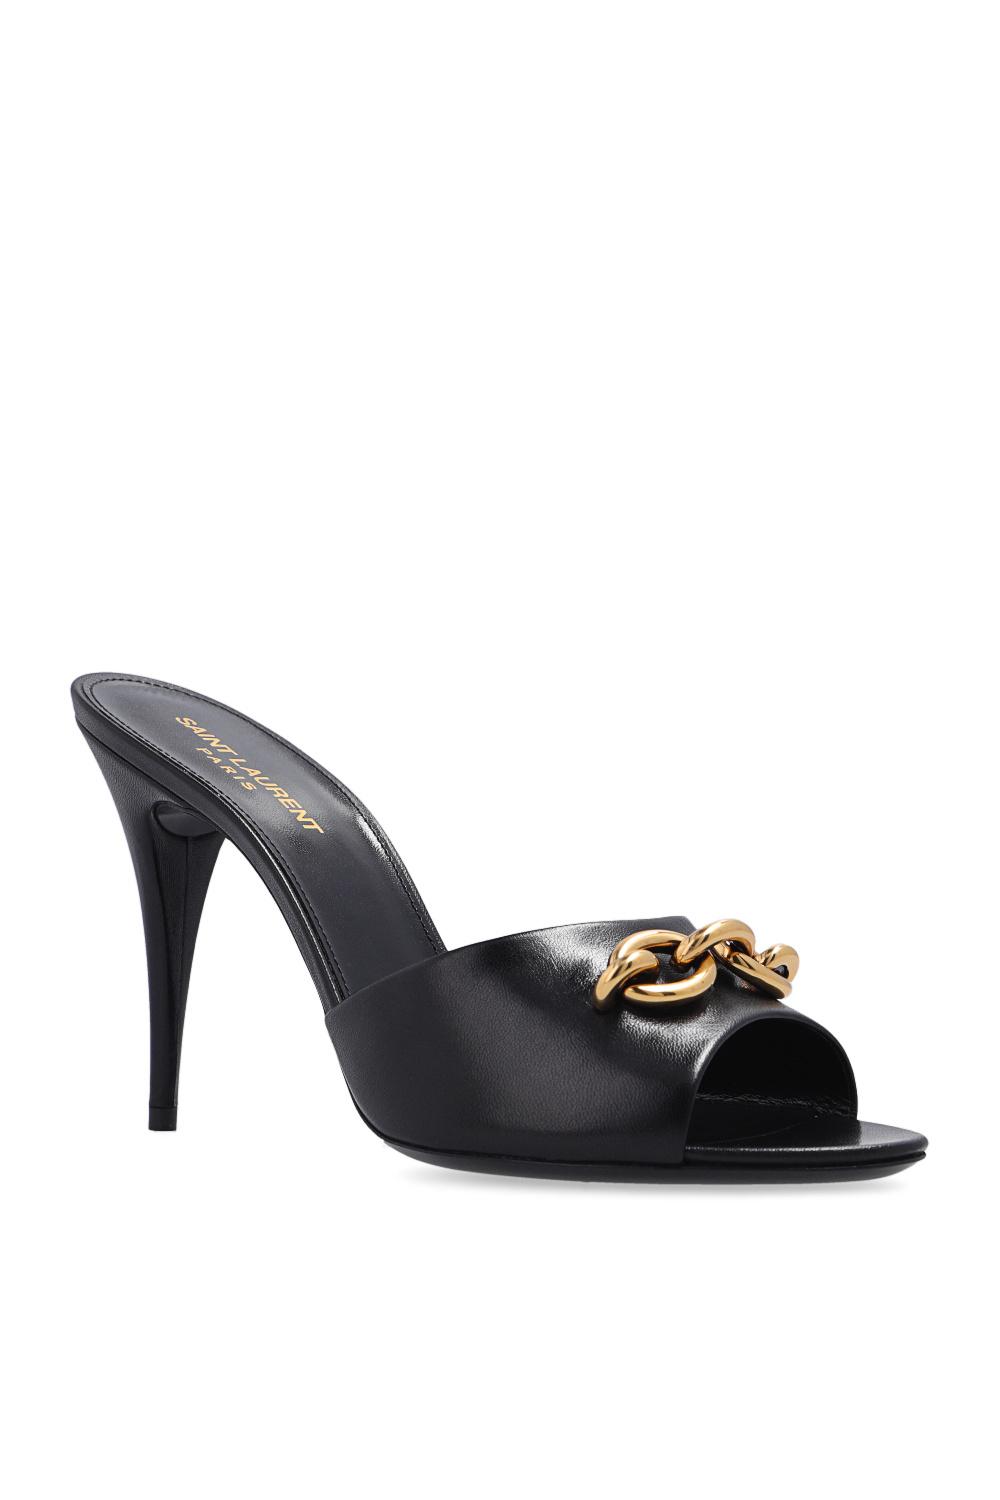 Saint Laurent Leather 'le Maillon' Heeled Mules in Black | Lyst